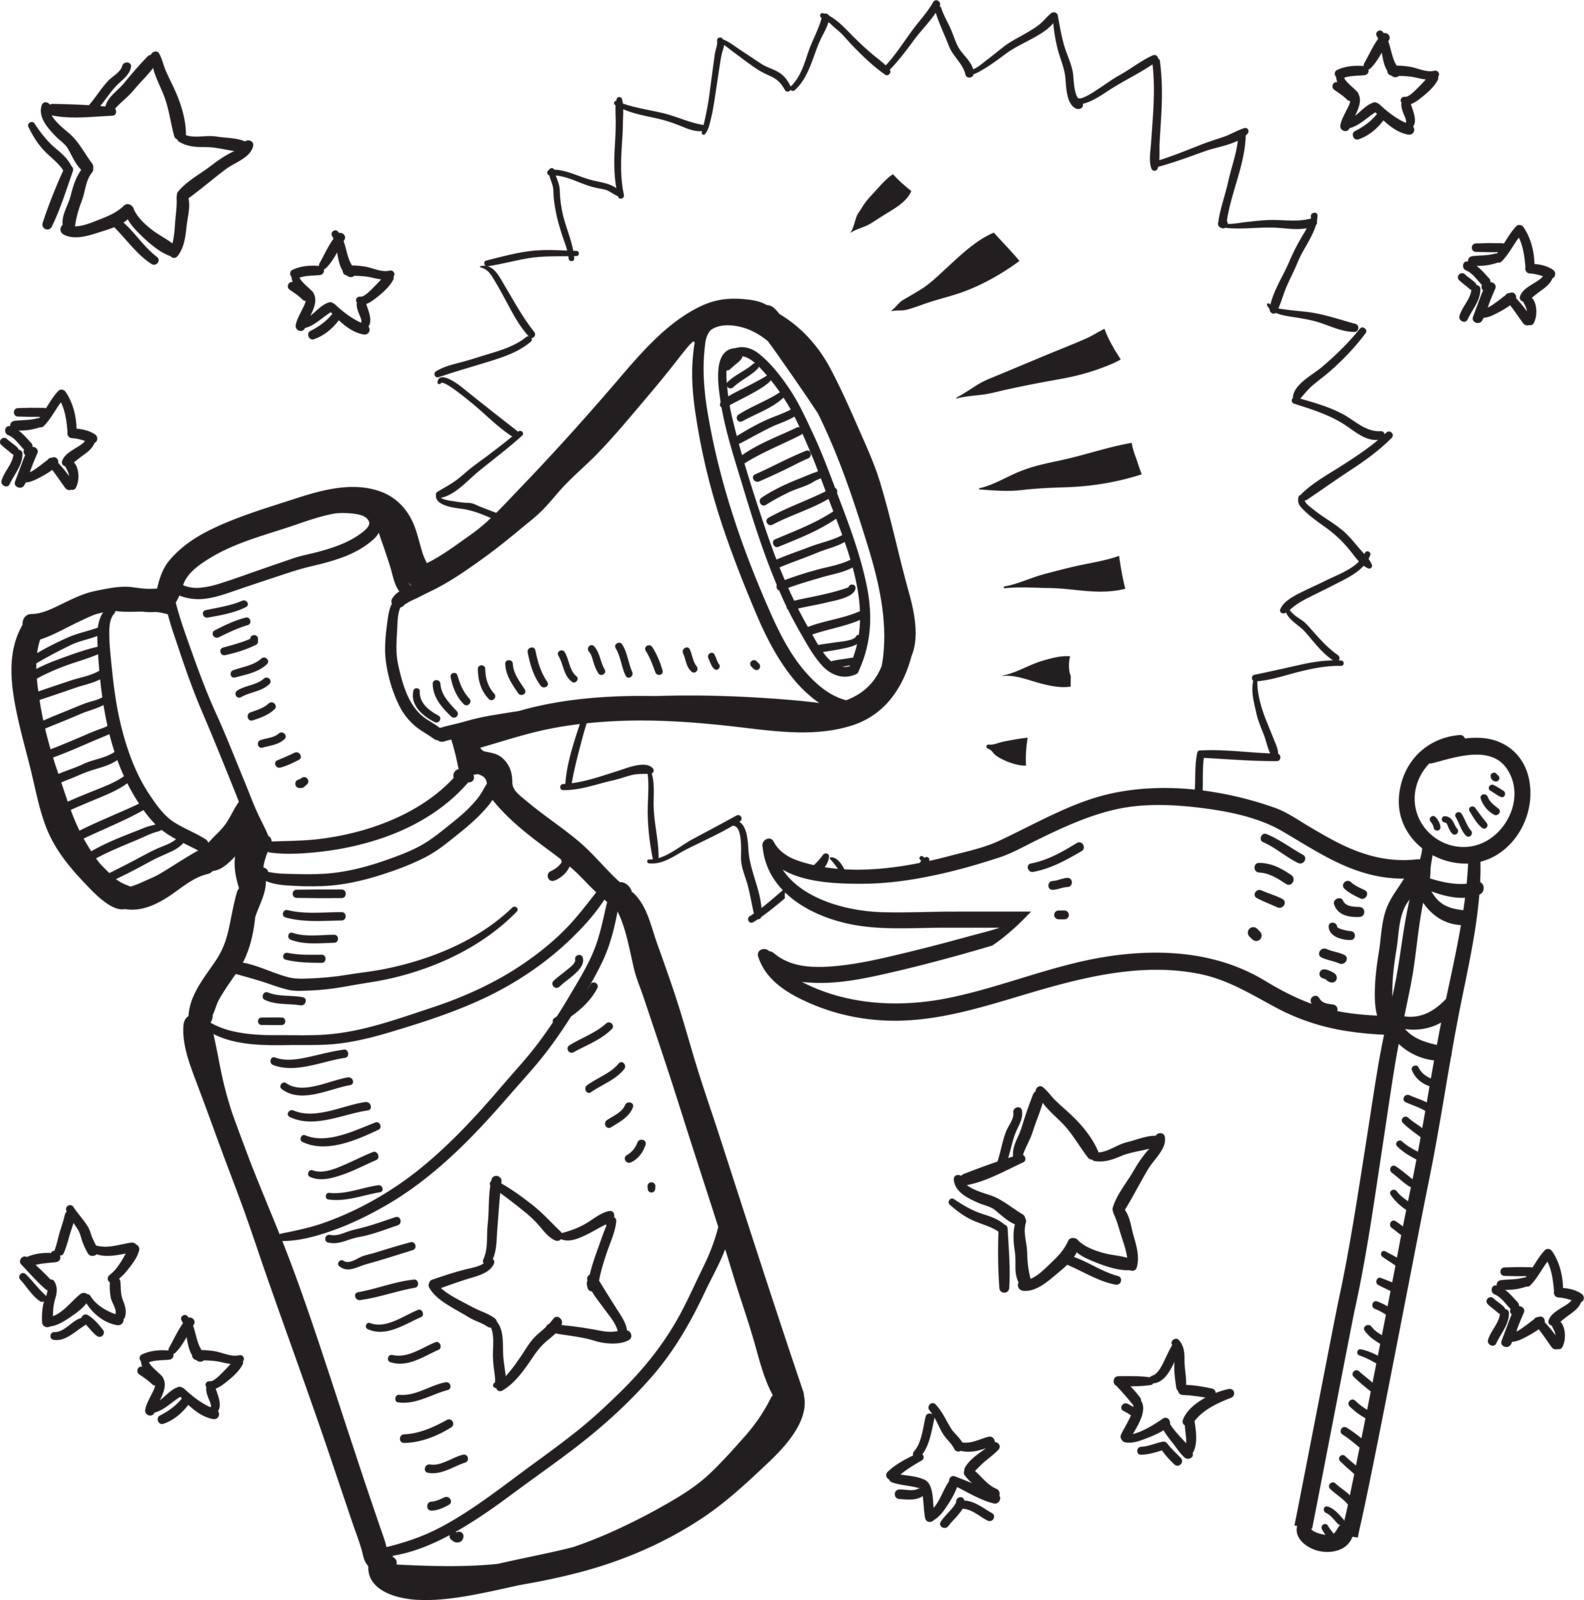 Doodle style announcement icon in vector format. Sketch includes air horn, and flag.